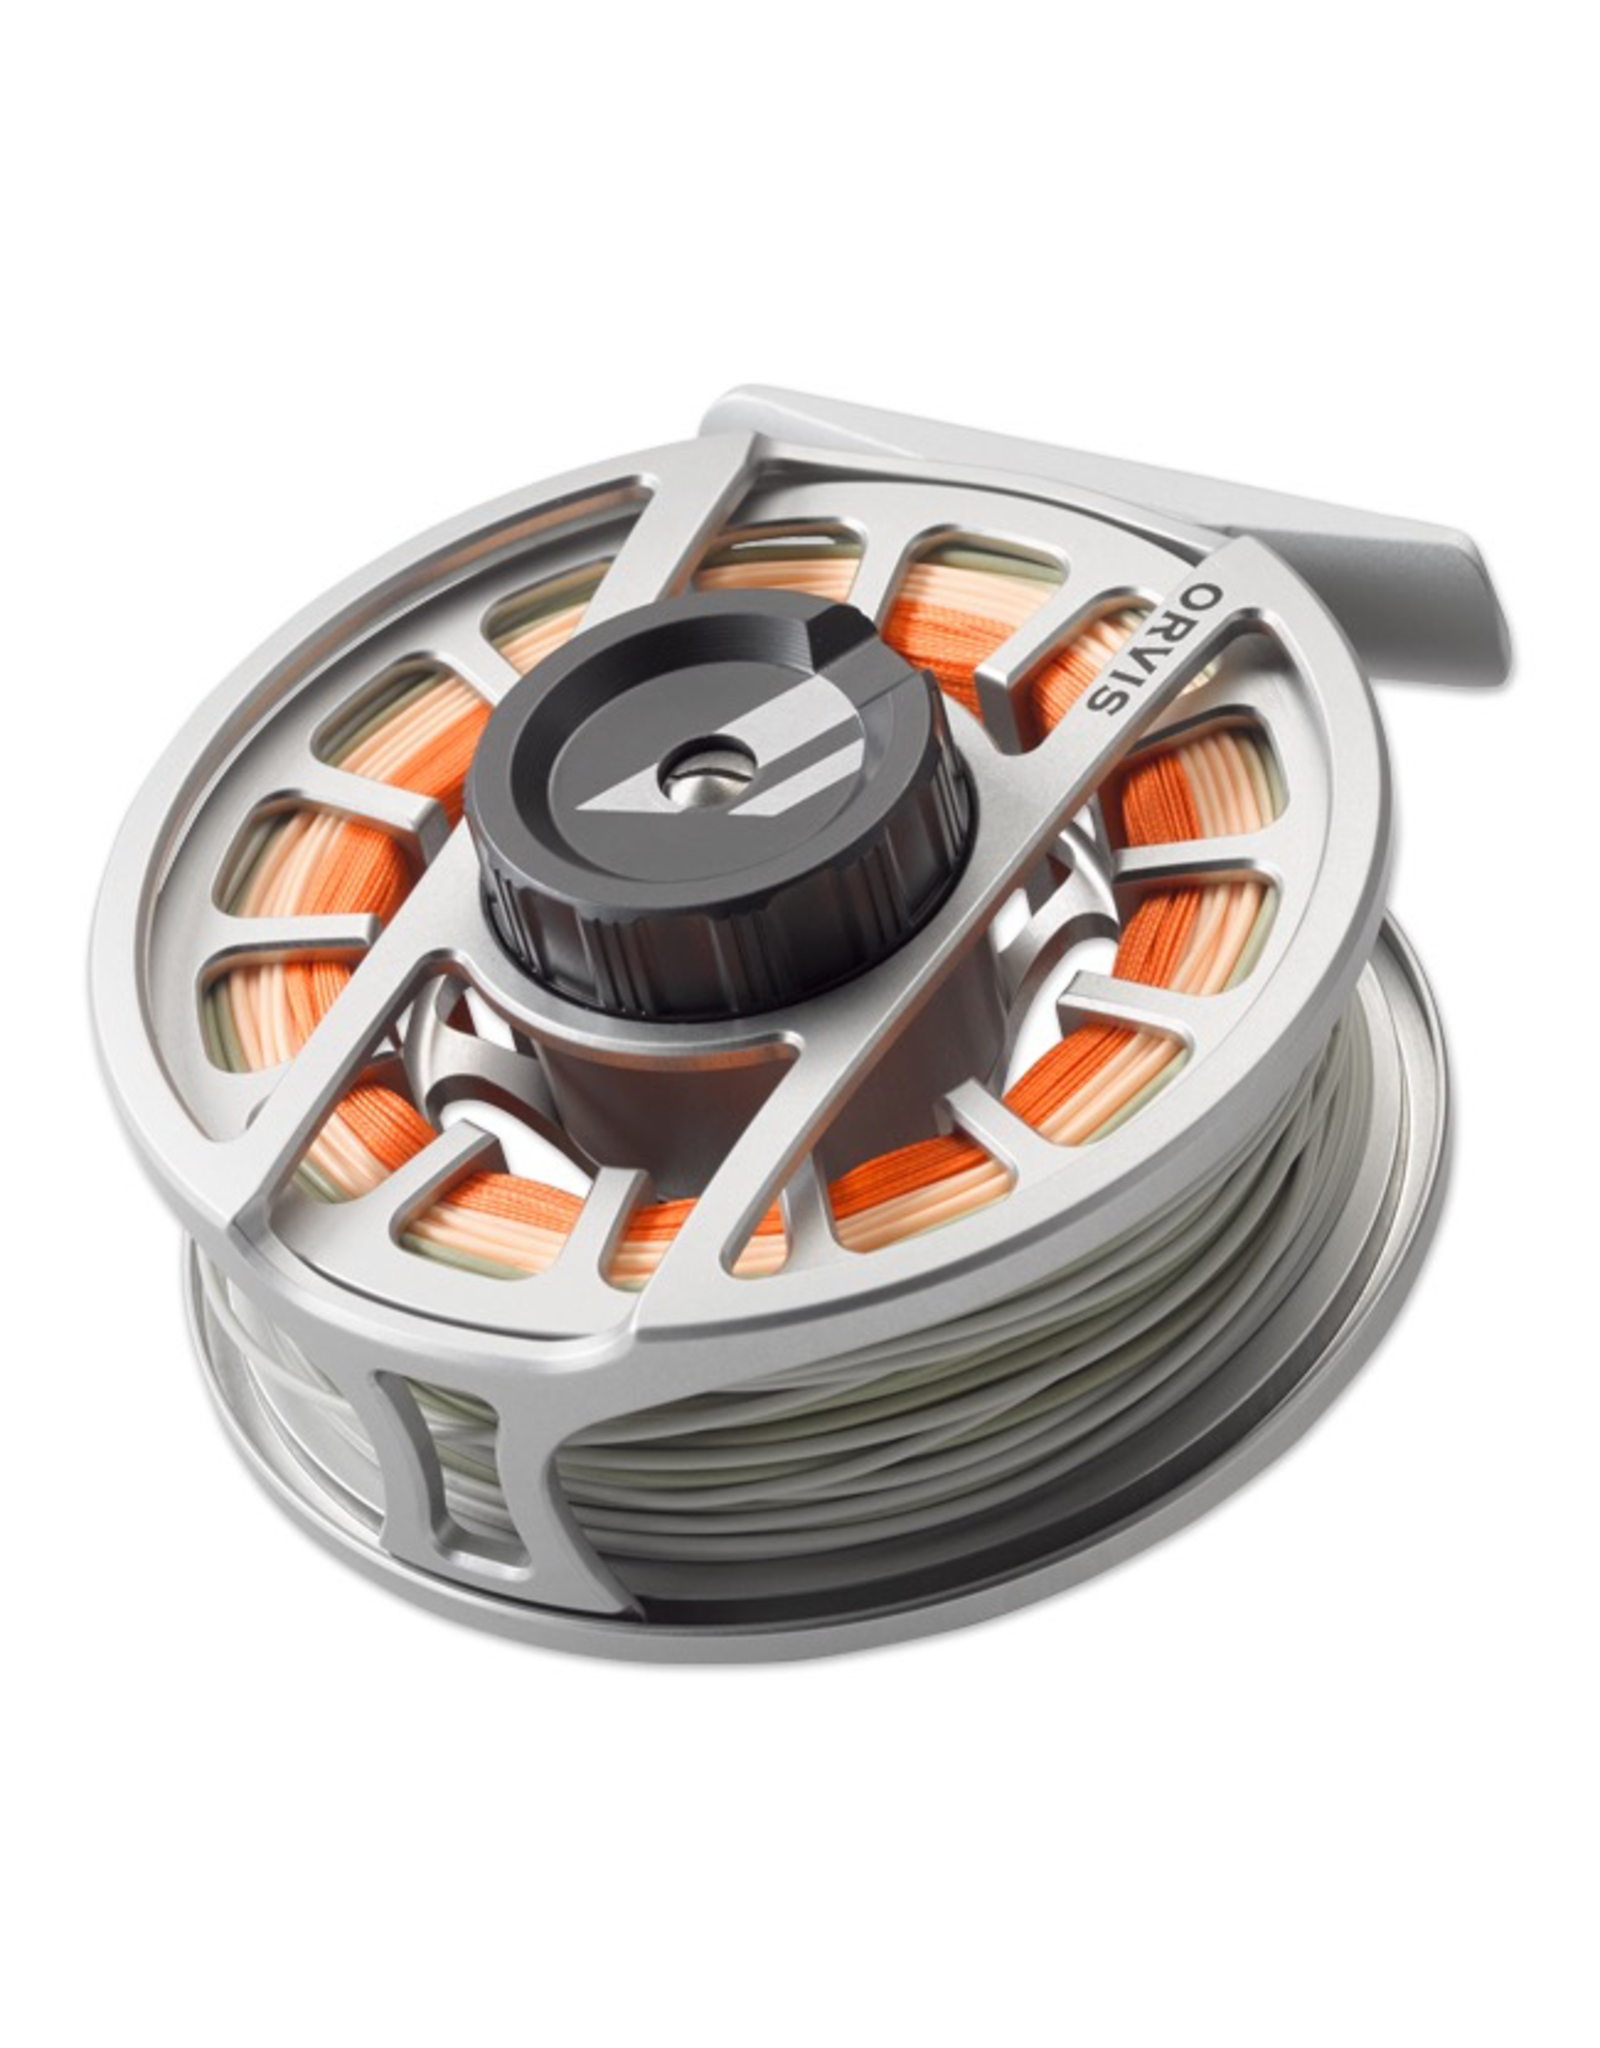 Orvis NEW ORVIS Hydros II Reel (Silver) 3-5wt - Royal Gorge Anglers